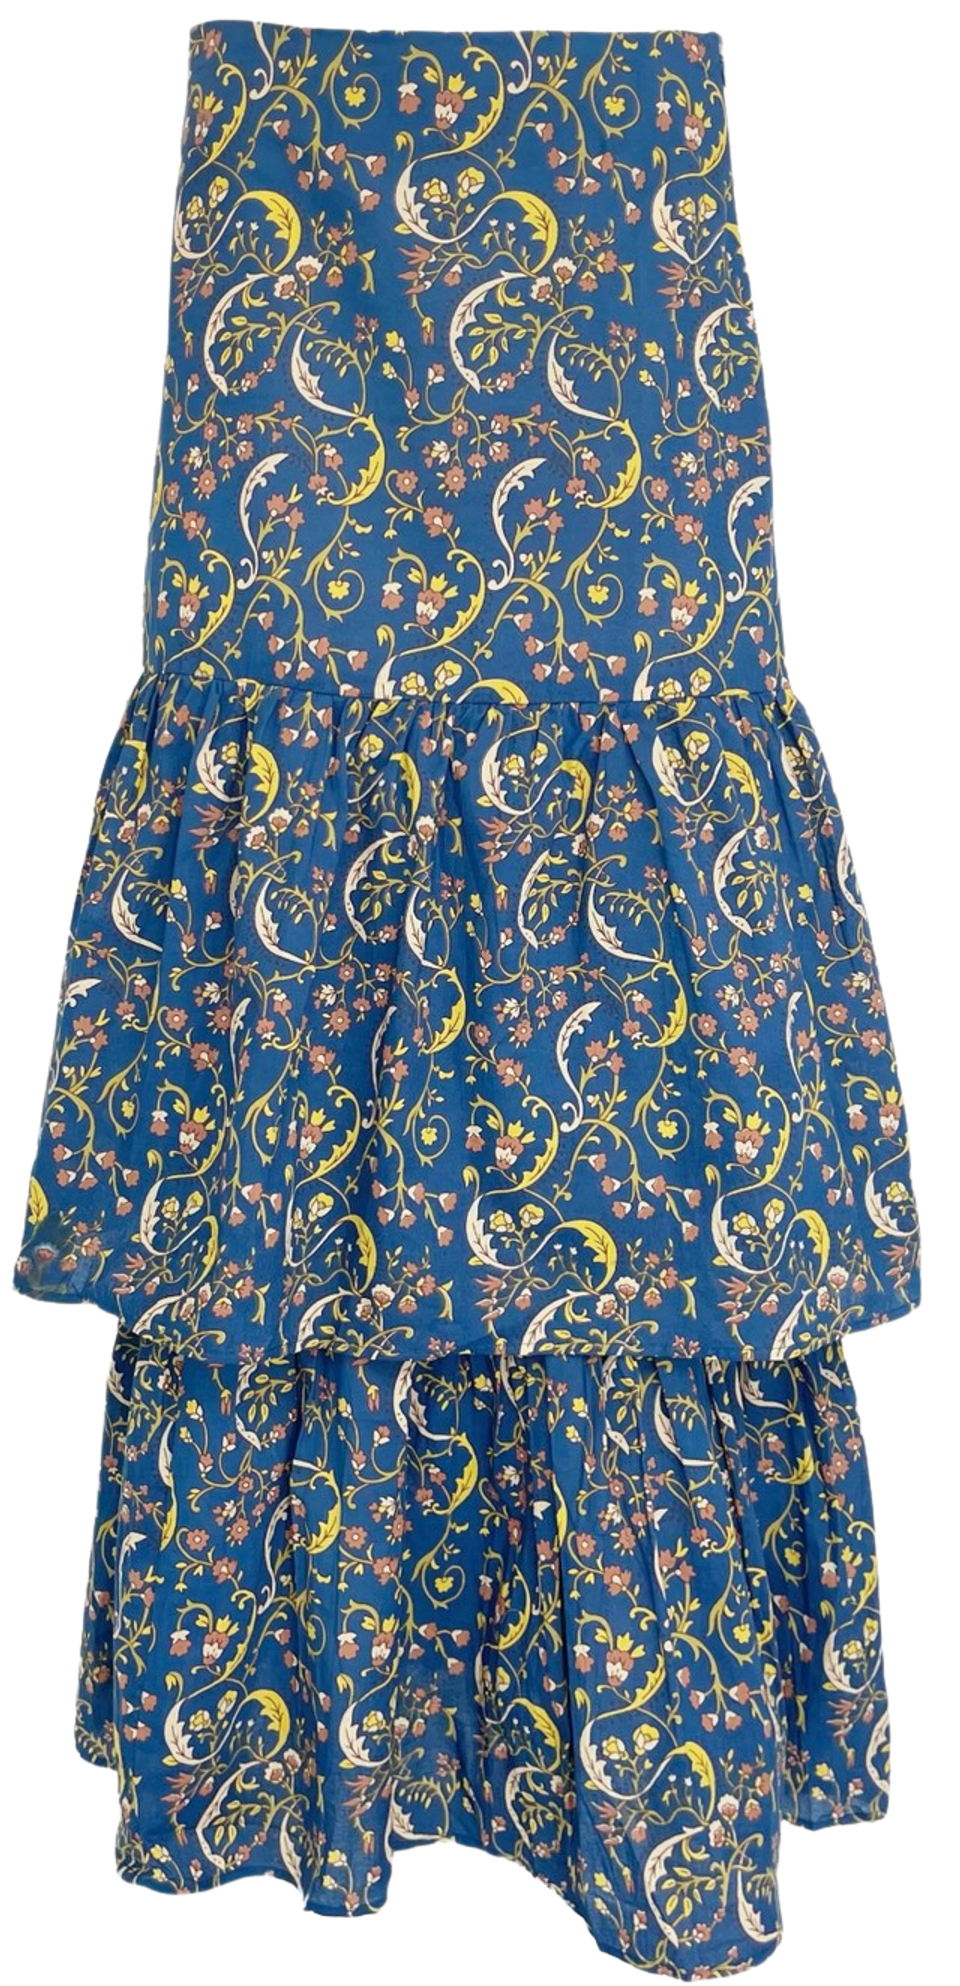 Anna Cate Skirts Anna Cate | Amelia Skirt in Royal / Yellow Paisley